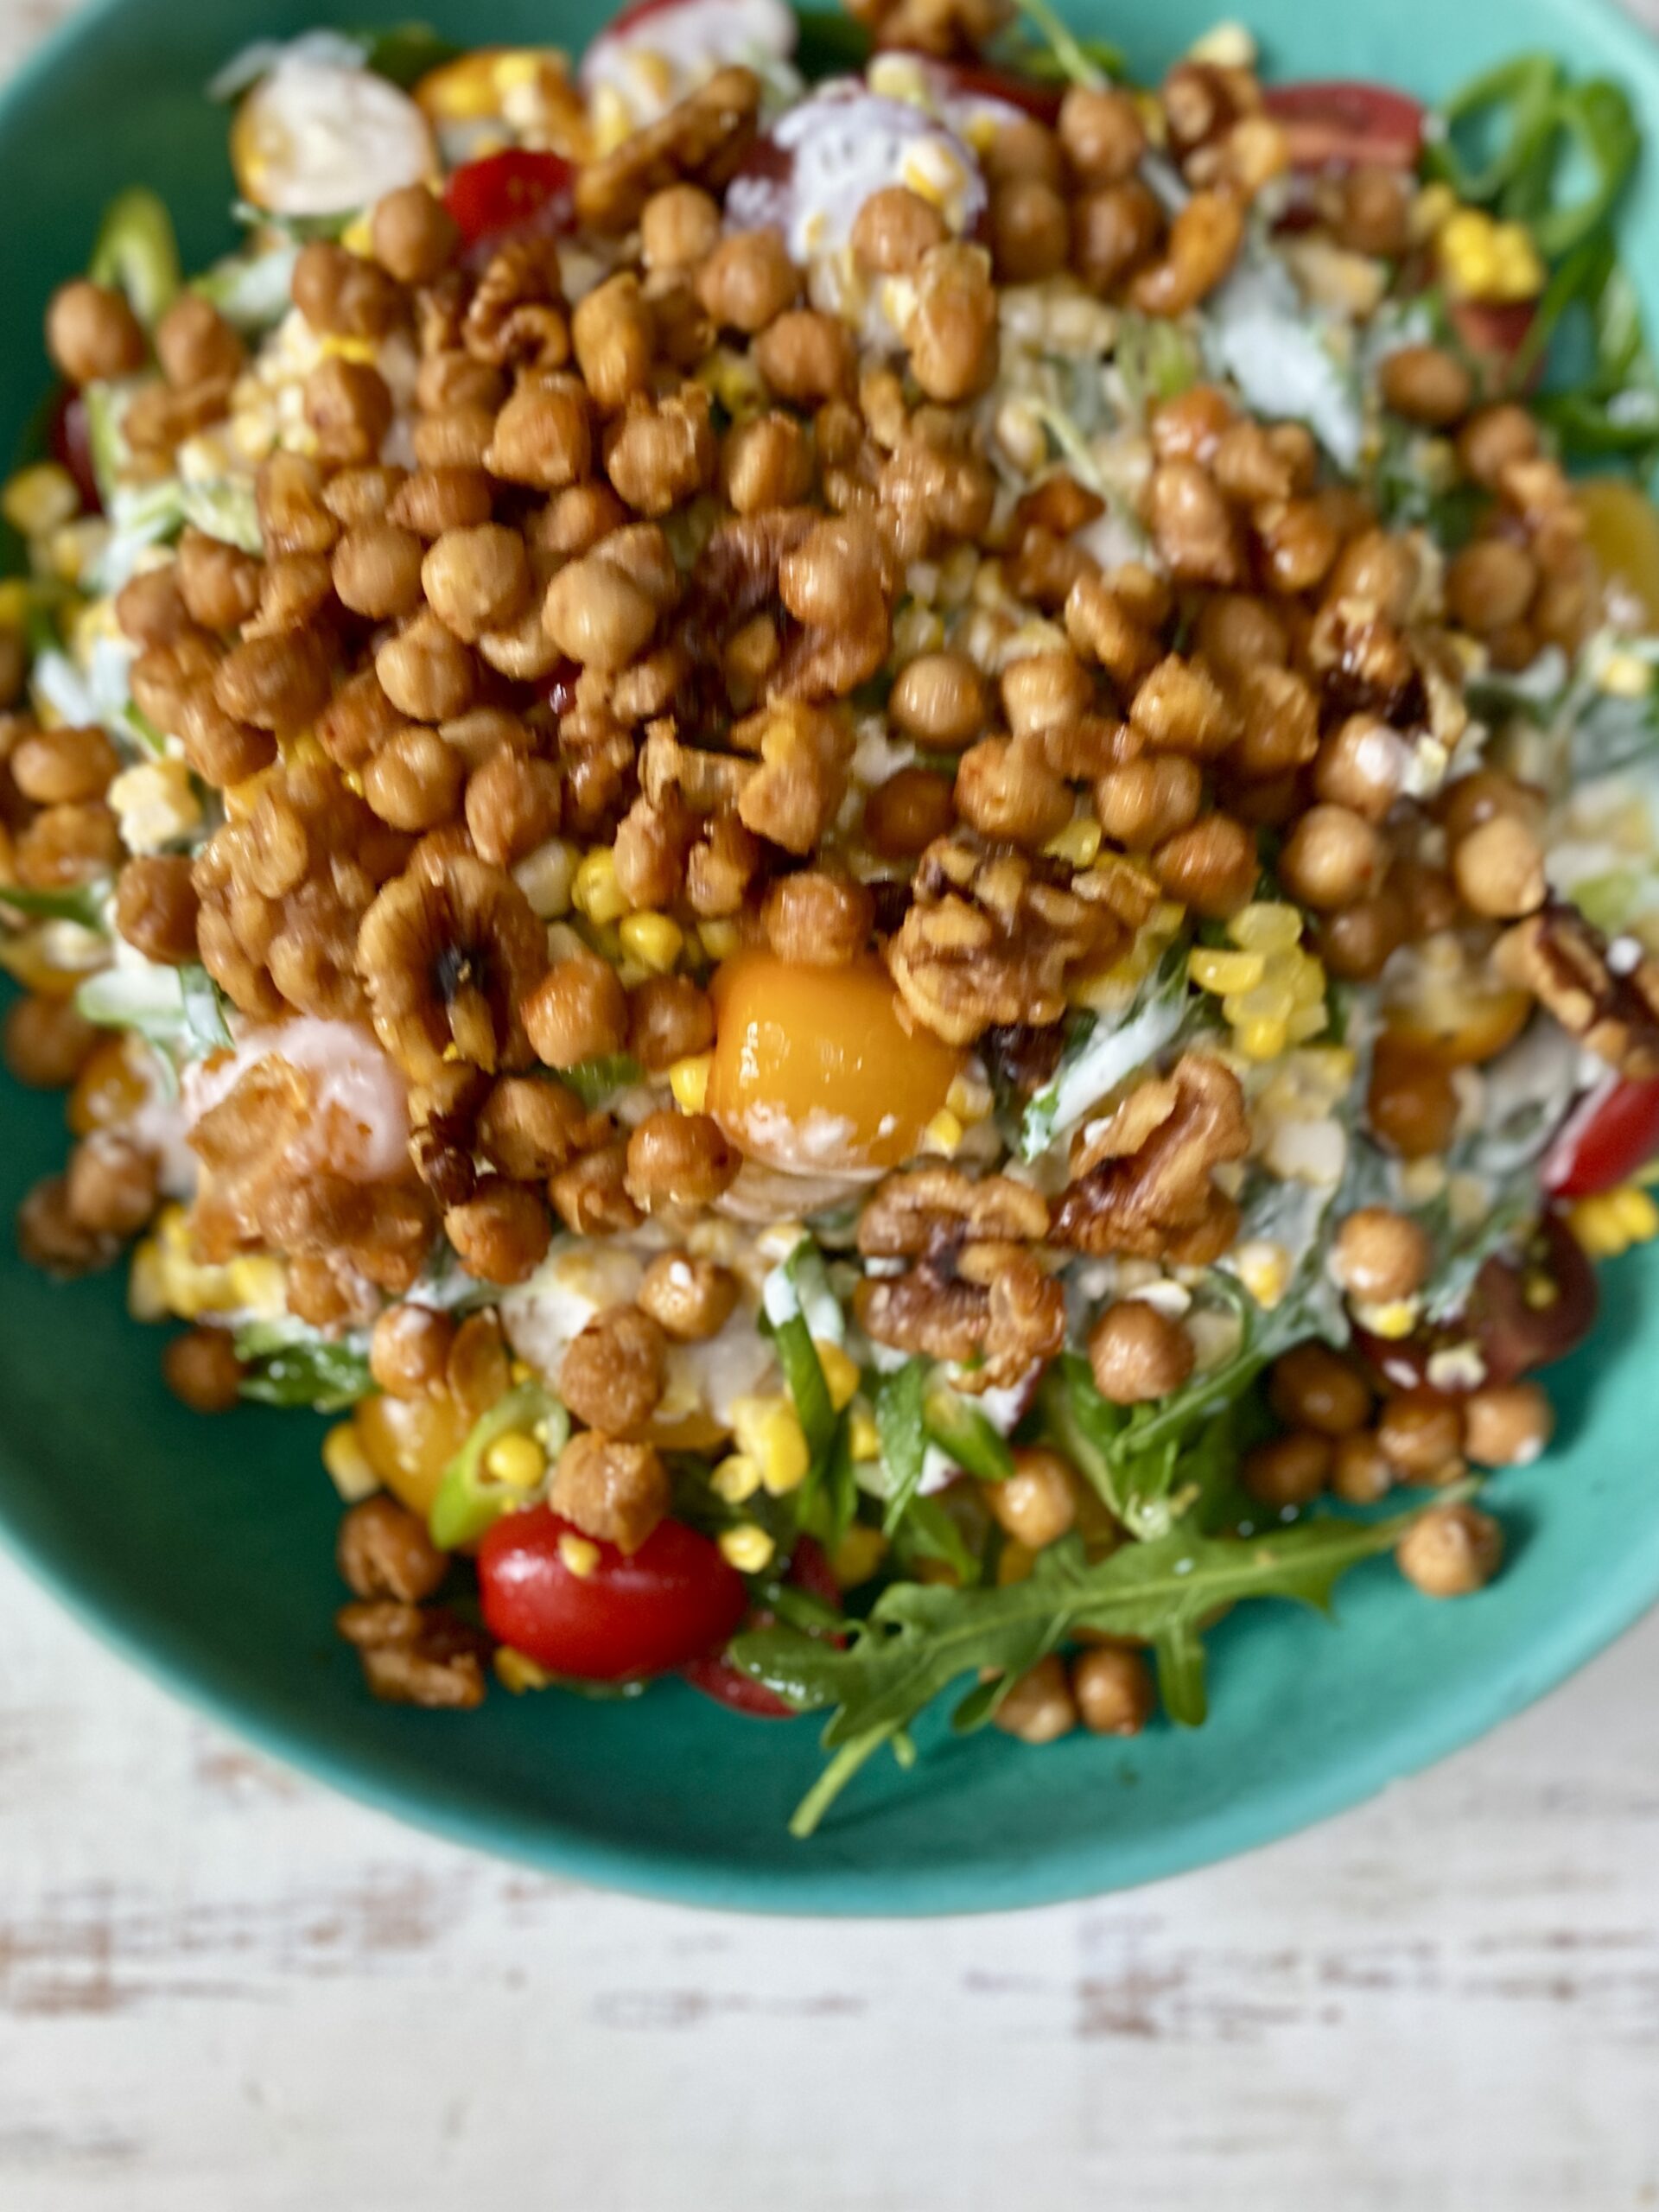 Corn and golden chickpea salad, Corn and Golden Chickpea salad with lime creamy dressing